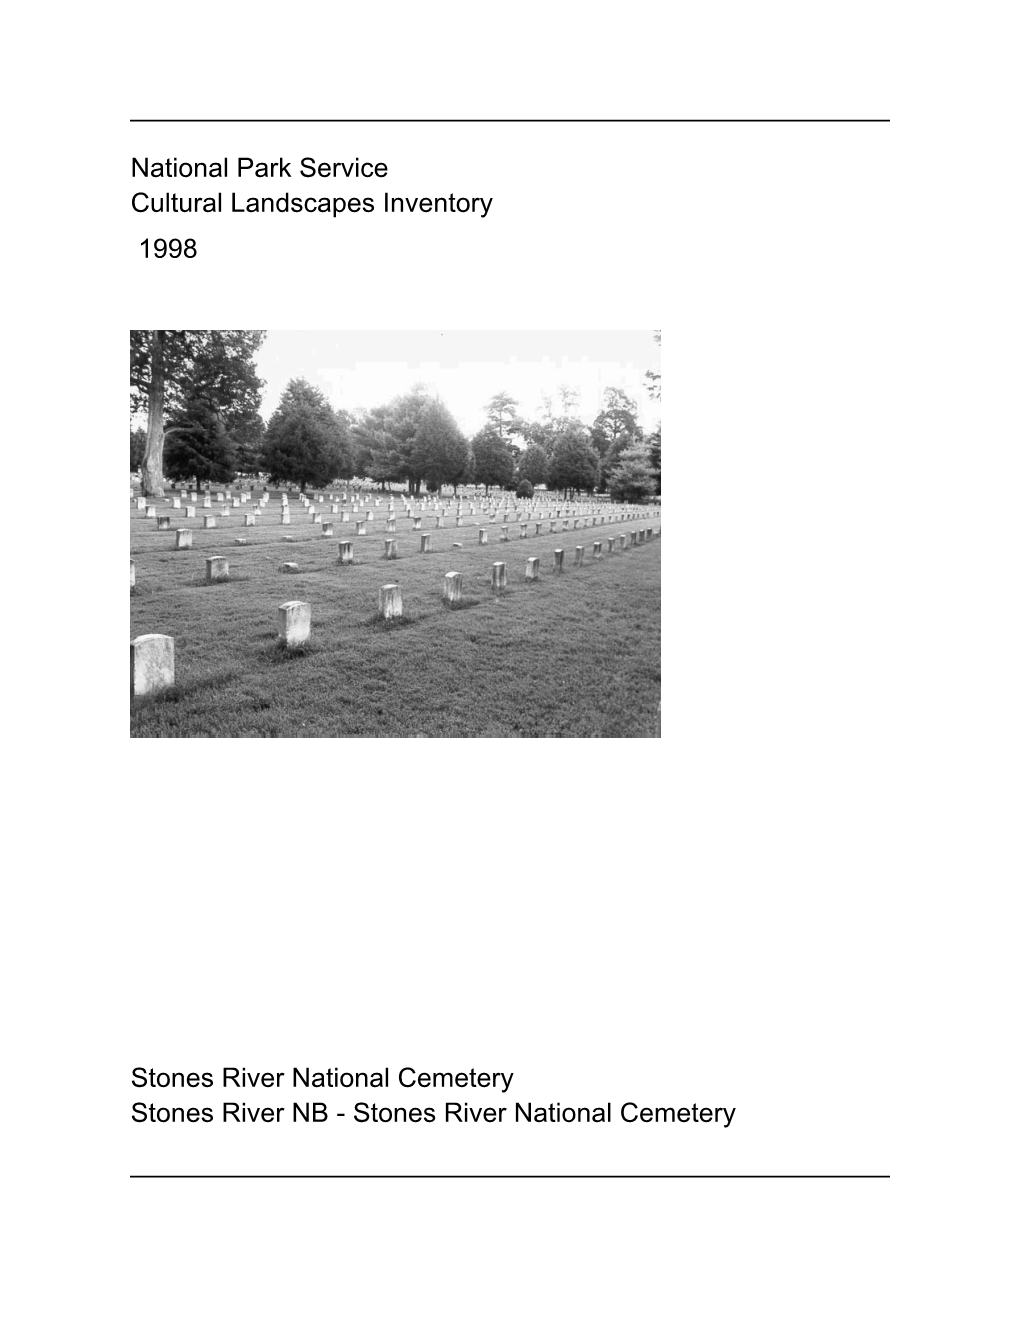 Cultural Landscapes Inventory: Stones River National Cemetery